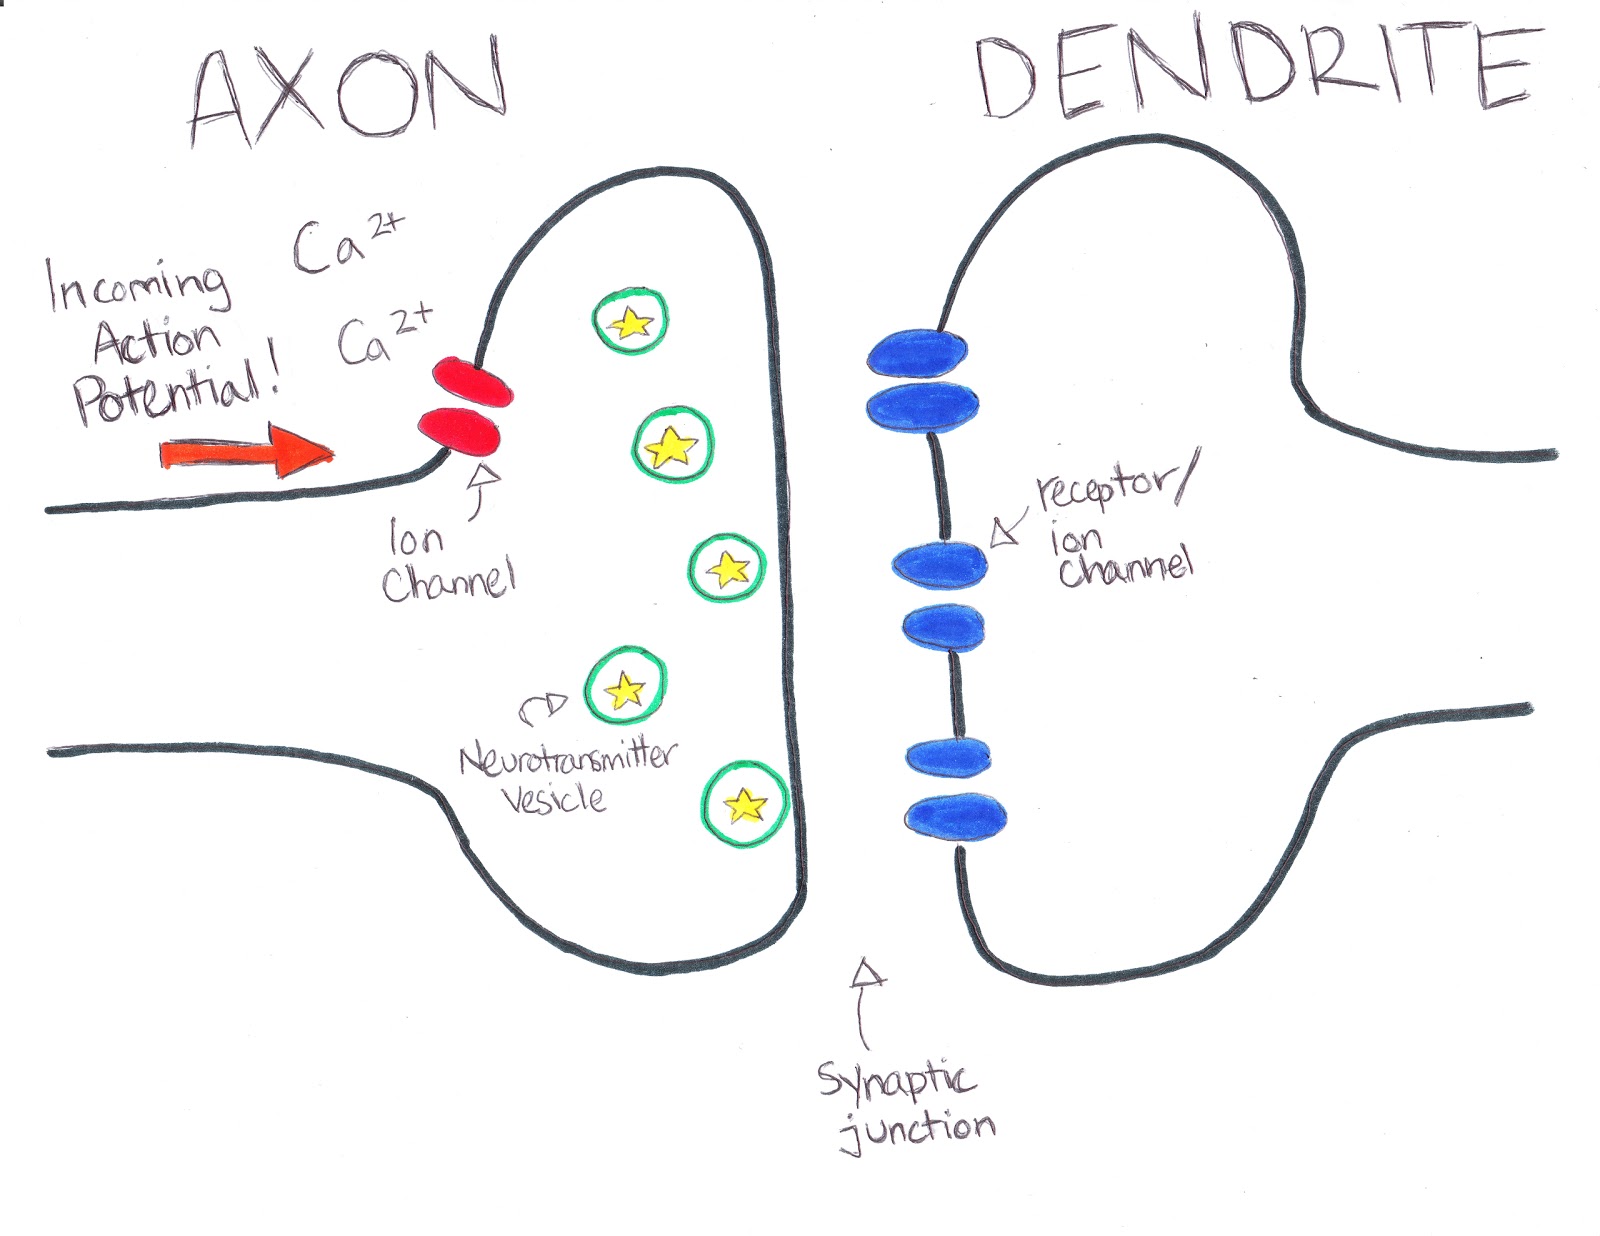 function of the dendrite